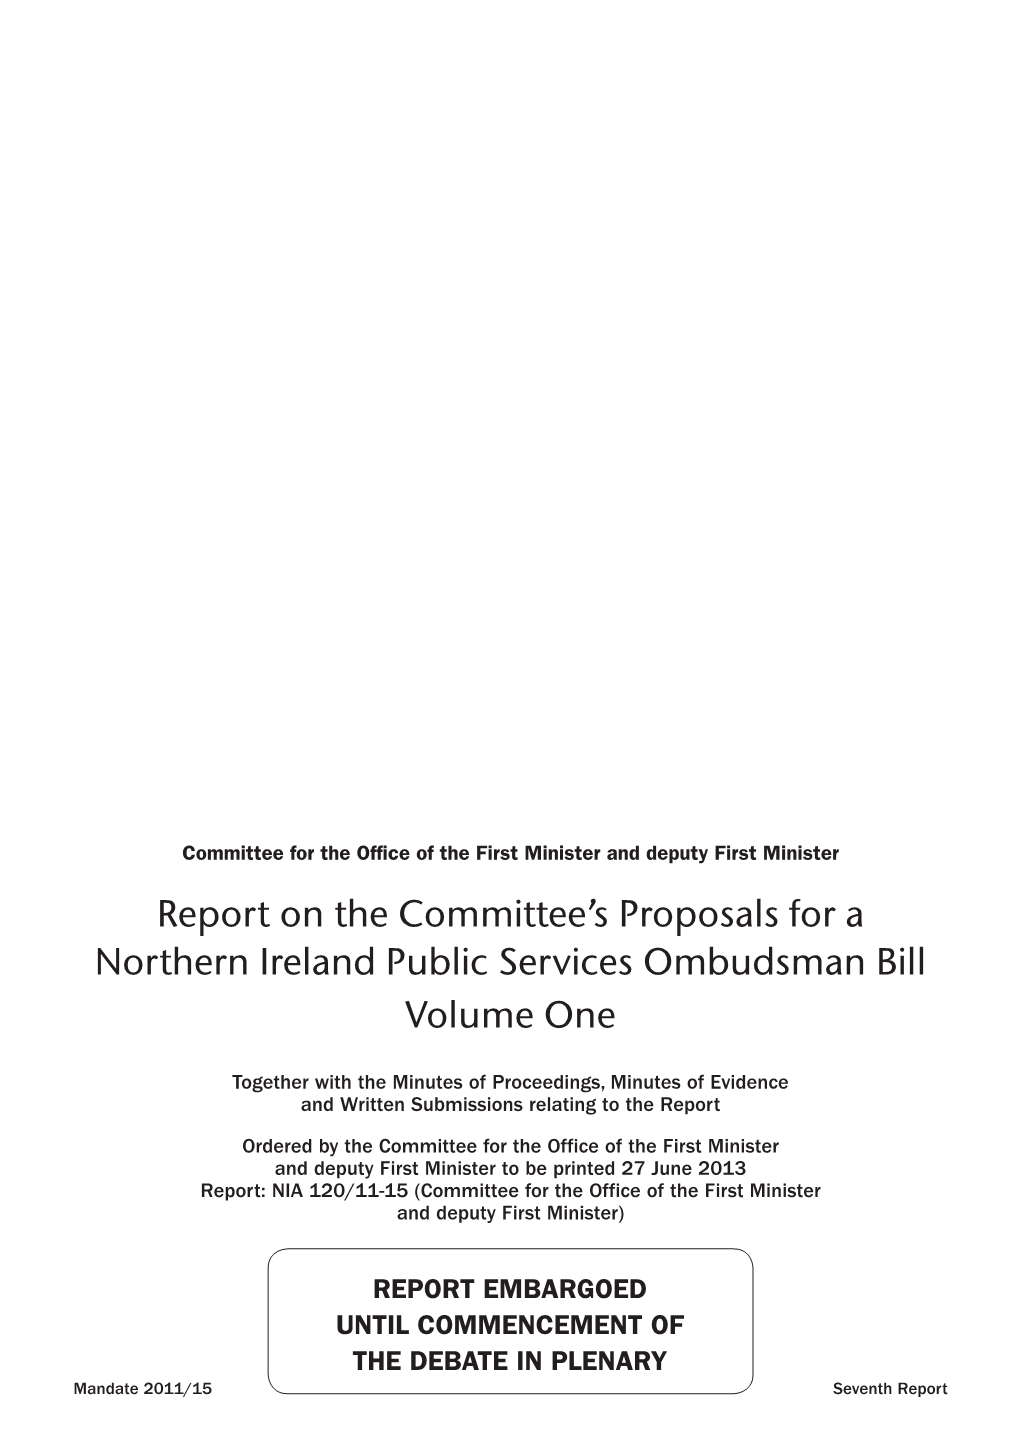 Report on the Committee's Proposals for a Northern Ireland Public